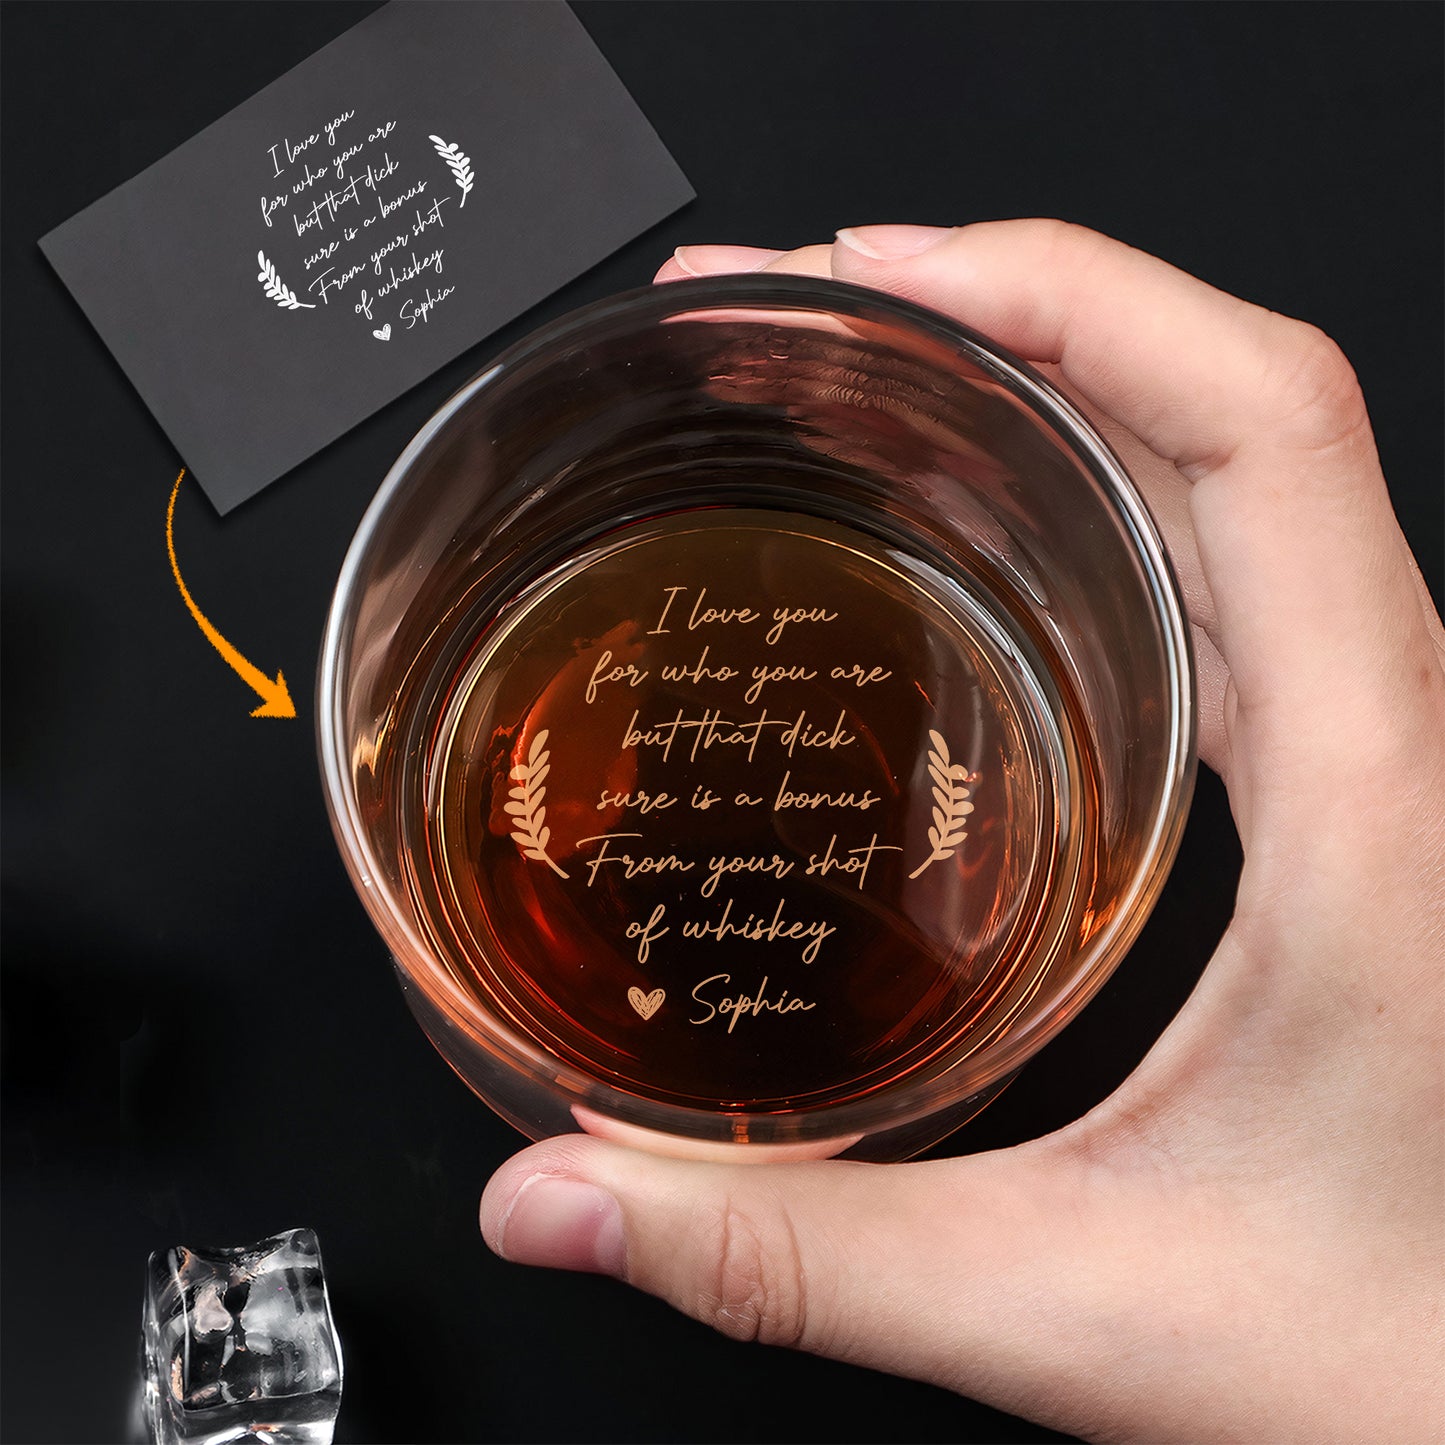 Family - I Love You For Who You Are But That Sure Is A Bonus - Personalized Whiskey Glass